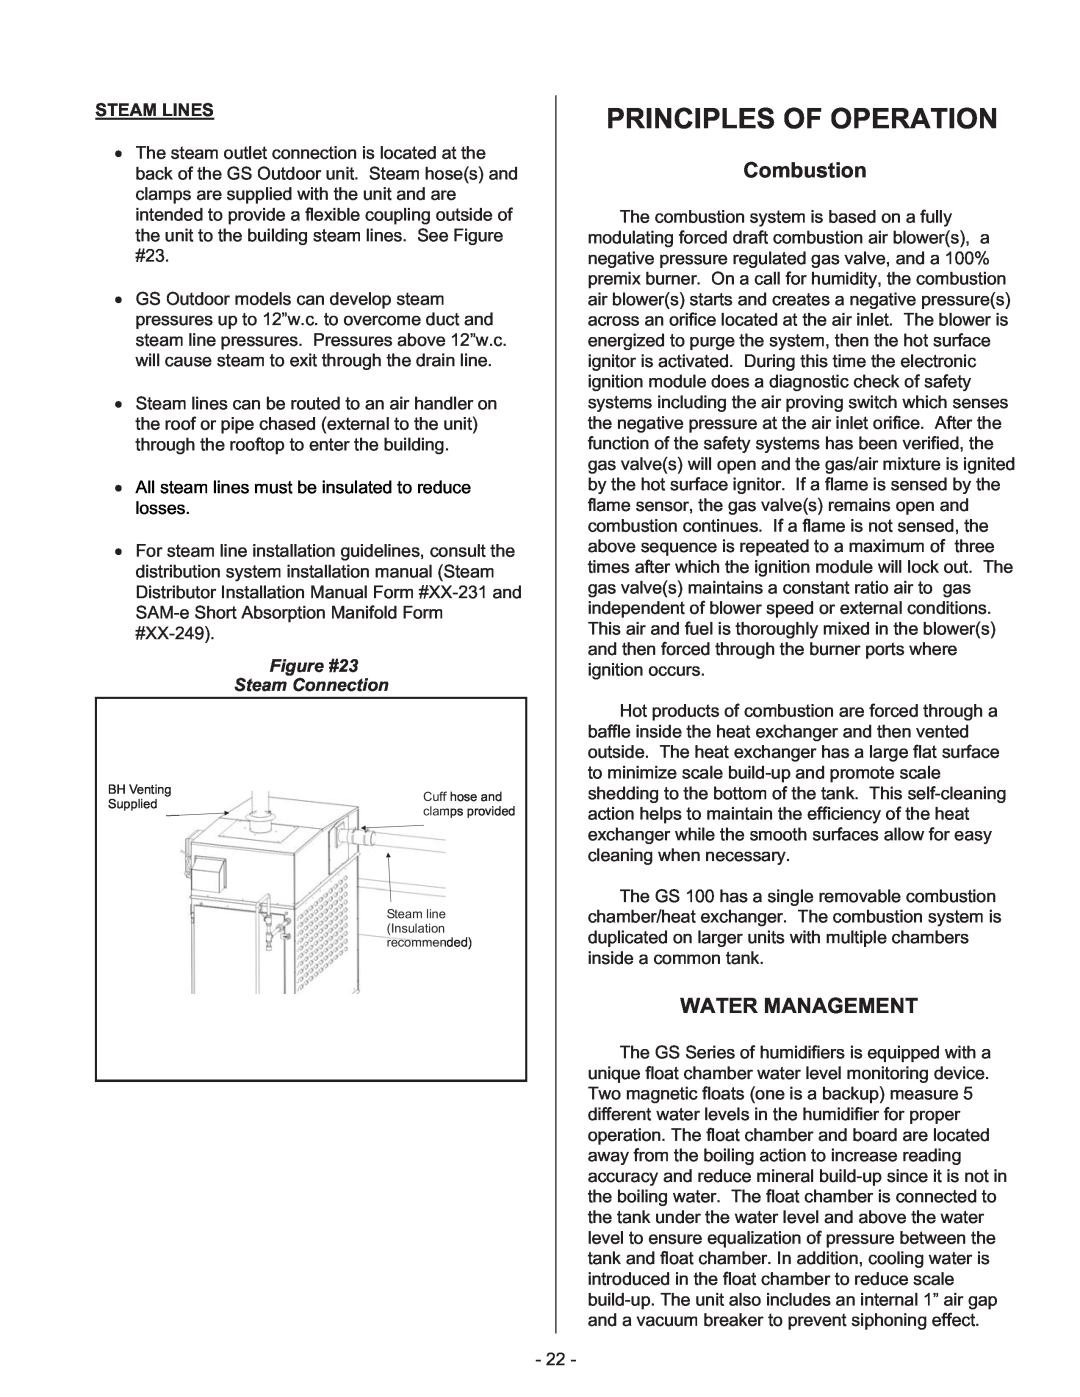 Nortec Industries GS Series manual Principles Of Operation, Combustion, Water Management, Figure #23 Steam Connection 